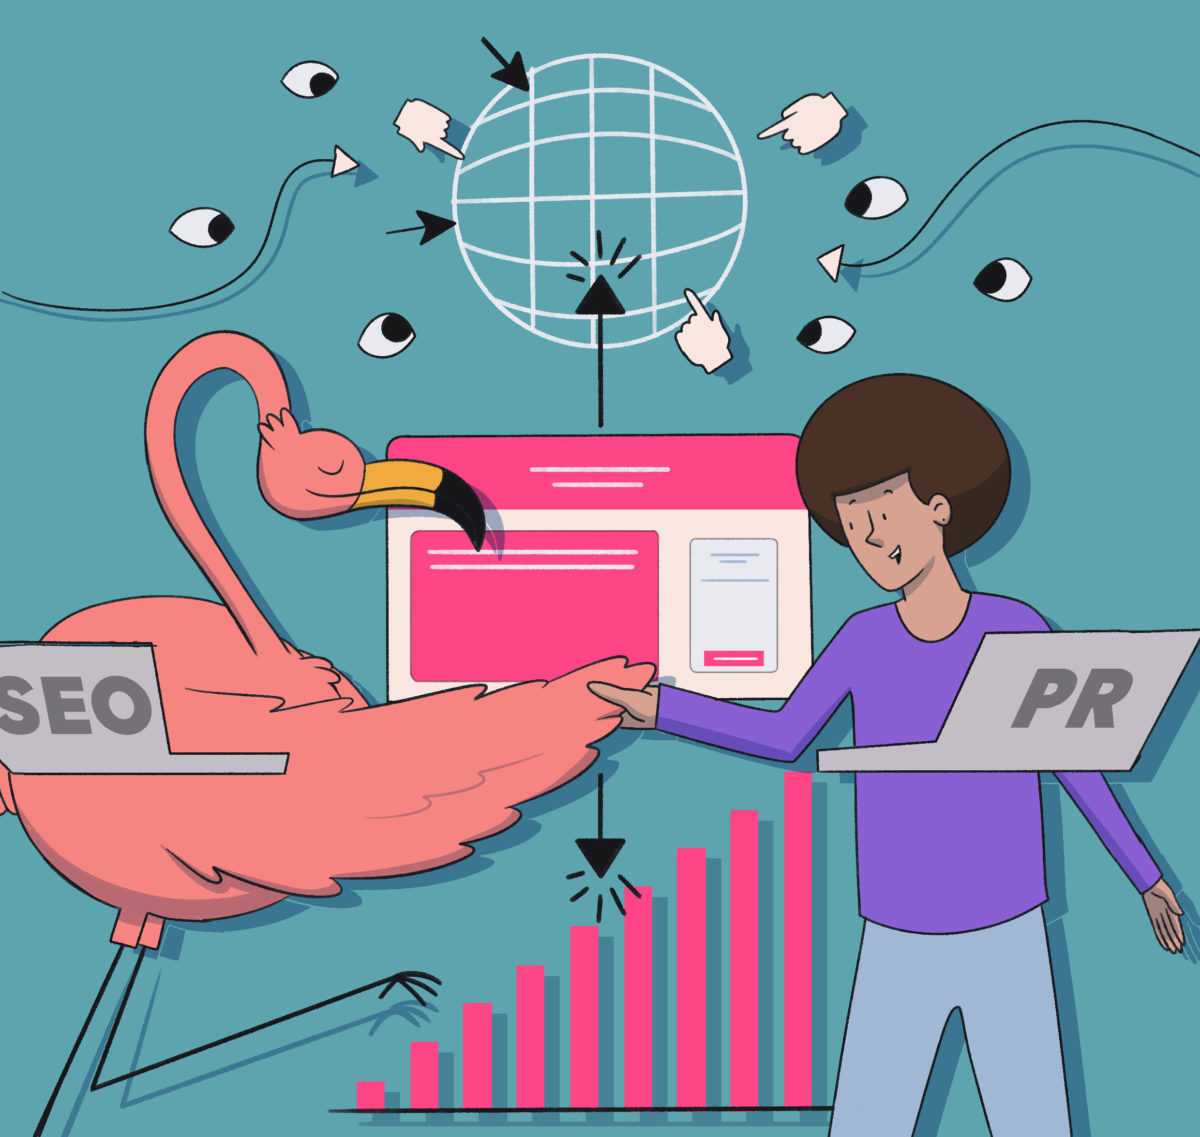 A person working on a laptop with seo and pr labels amidst whimsical elements like a flamingo, flying envelopes, and a disco ball, representing digital marketing concepts.